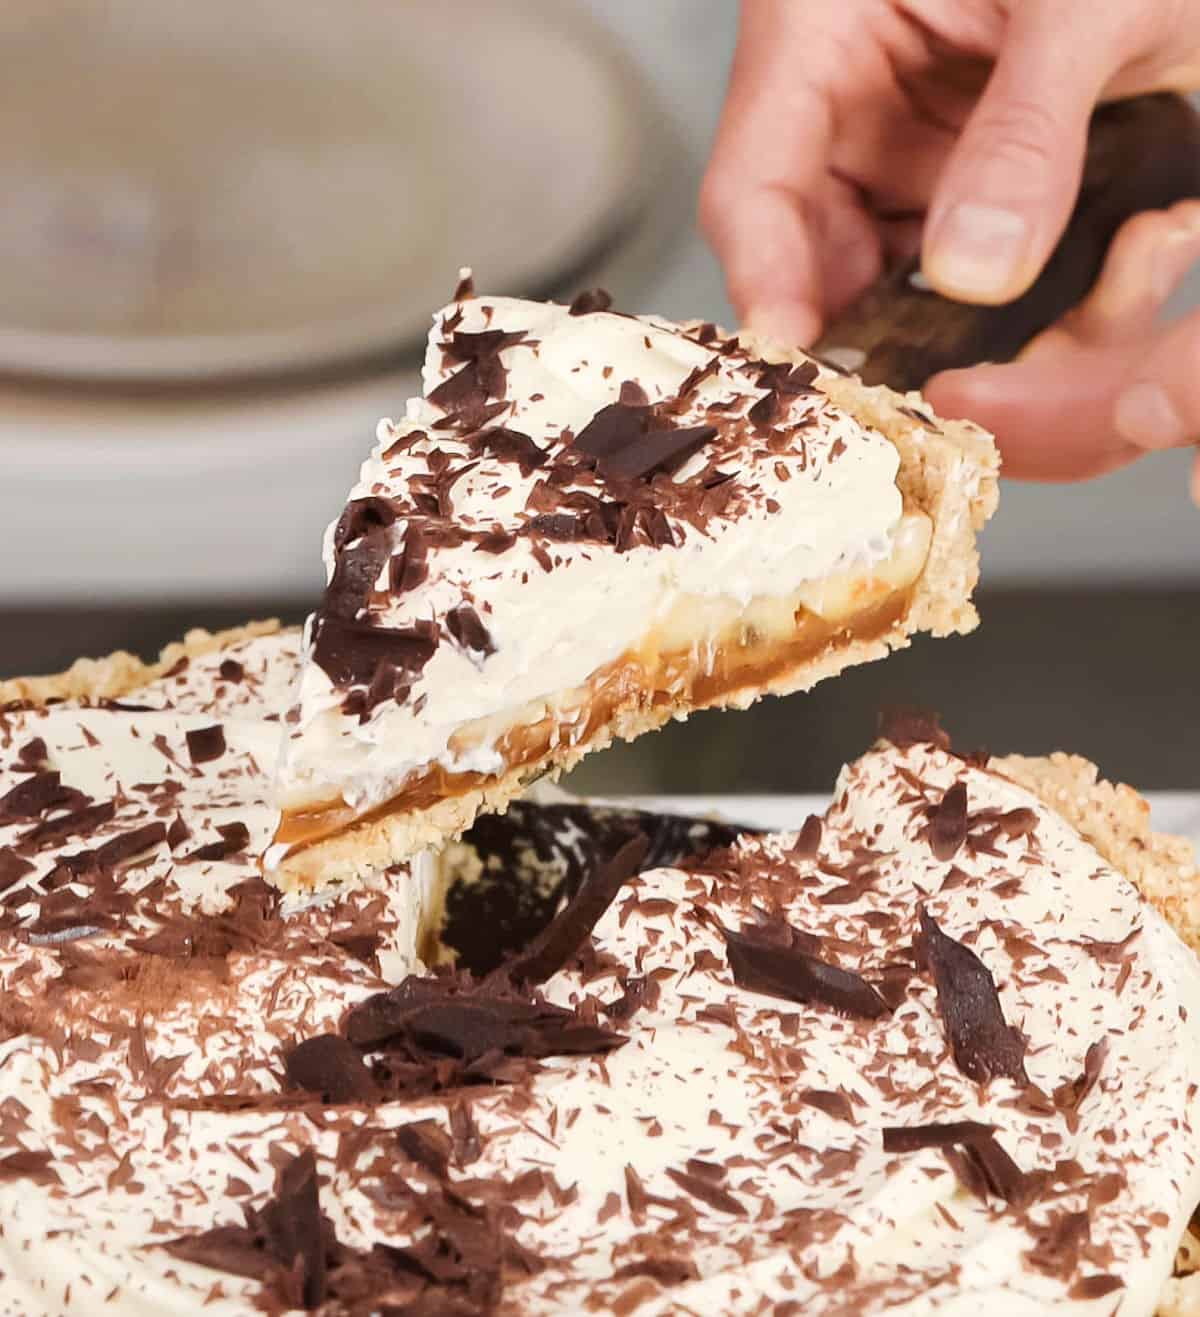 Lifting slice of banoffee pie from whole pie with cake server.